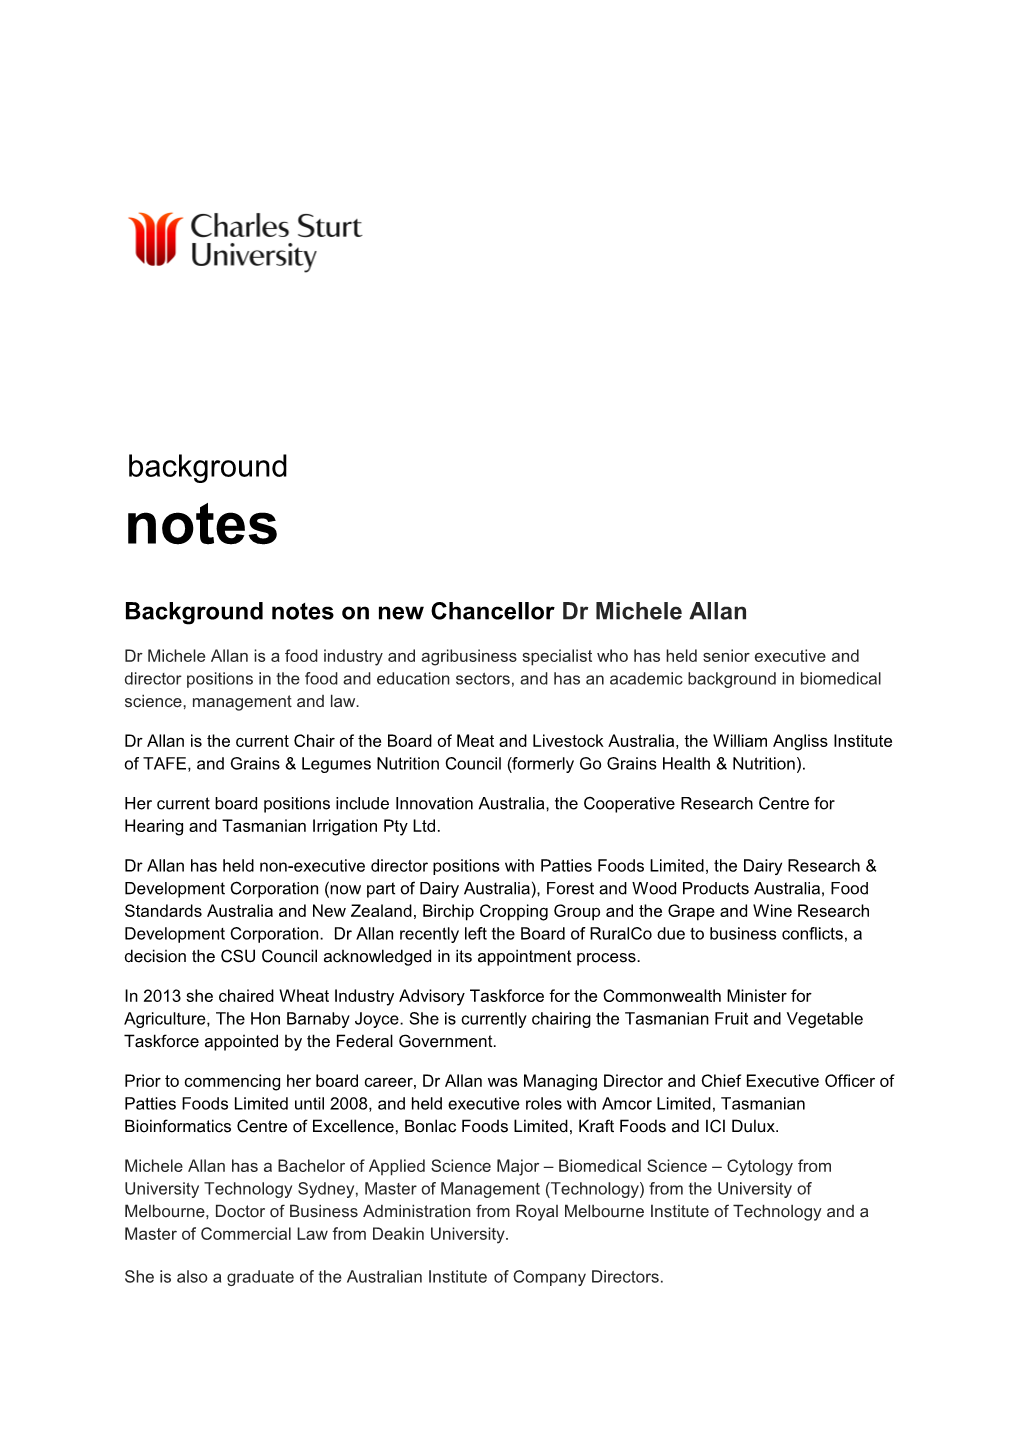 Background Notes on New Chancellor Dr Michele Allan